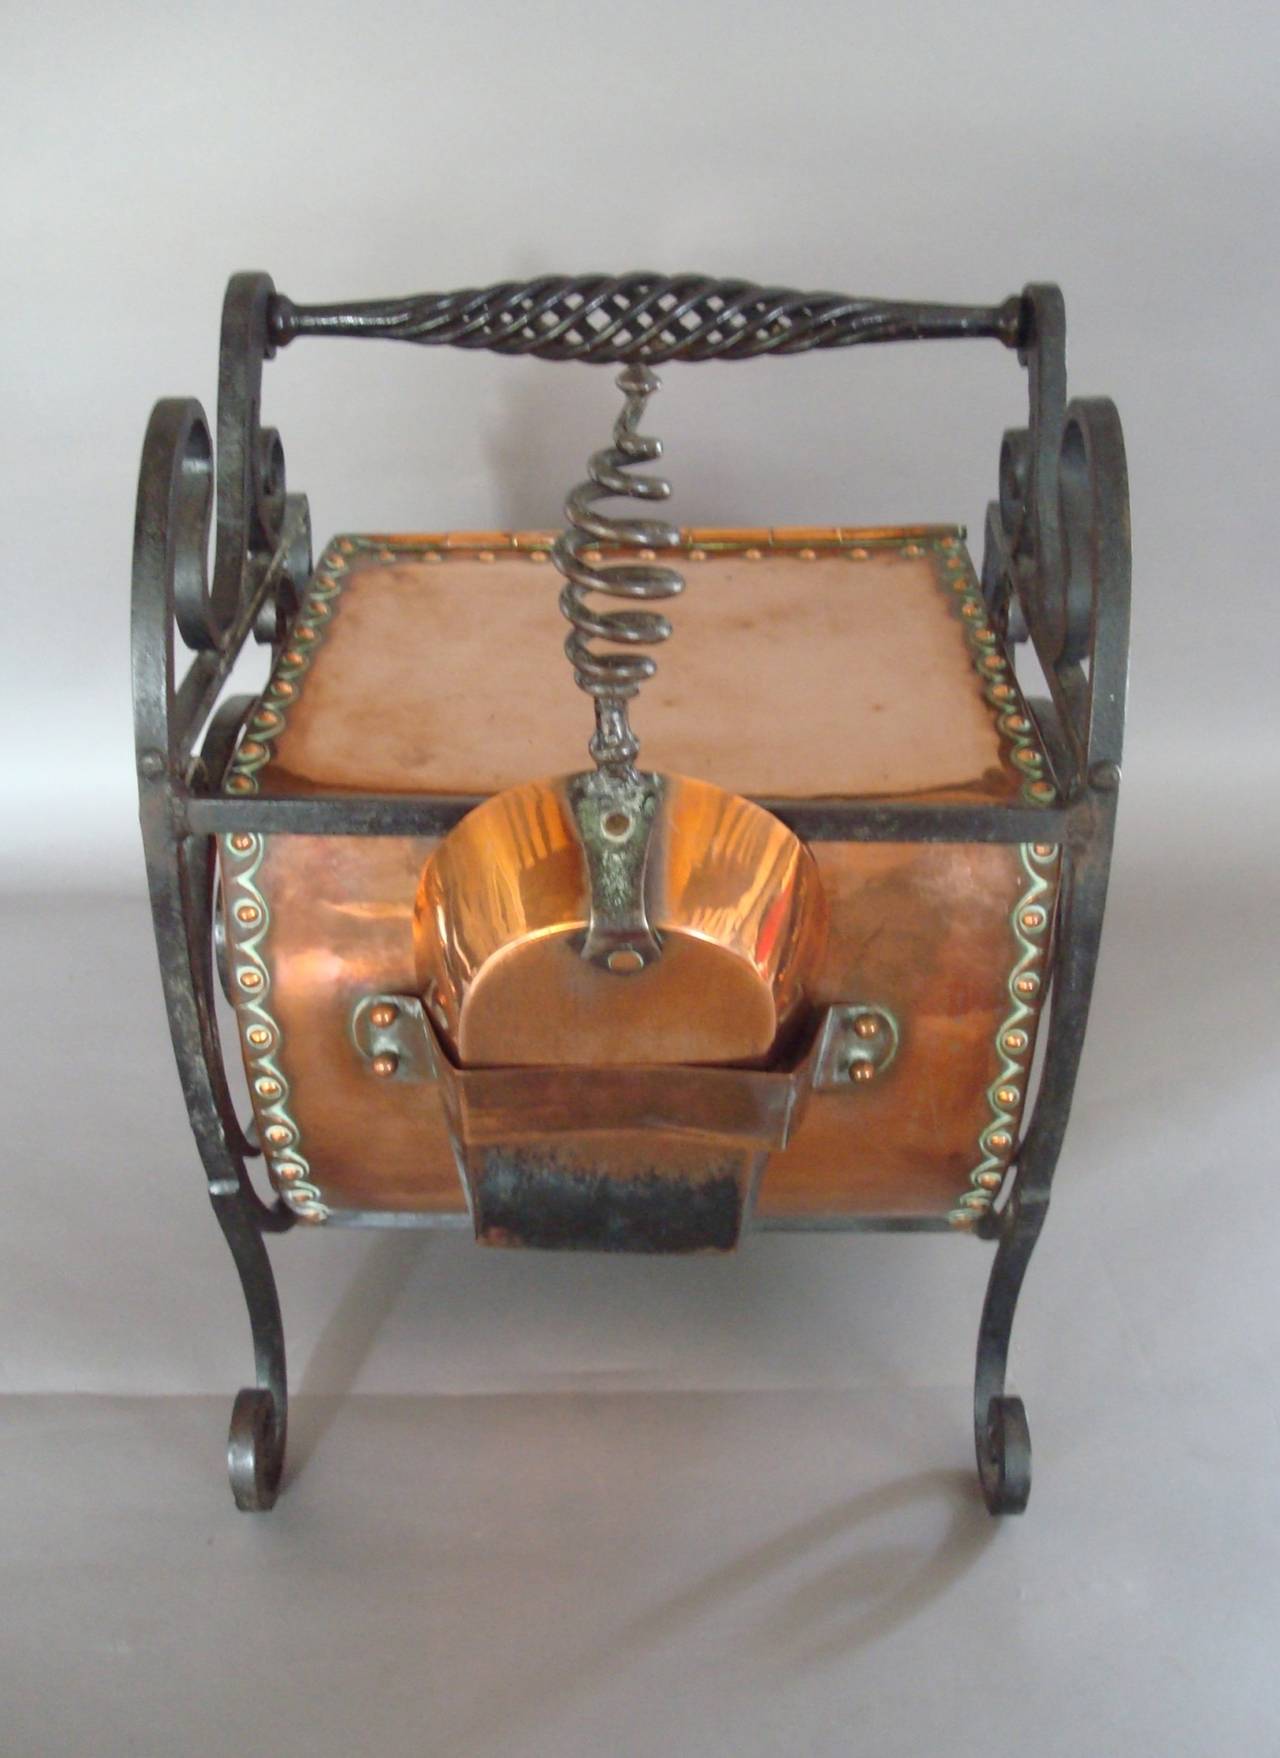 Large 19th Century Arts and Crafts Copper and Iron Purdonium or Coal Scuttle For Sale 3